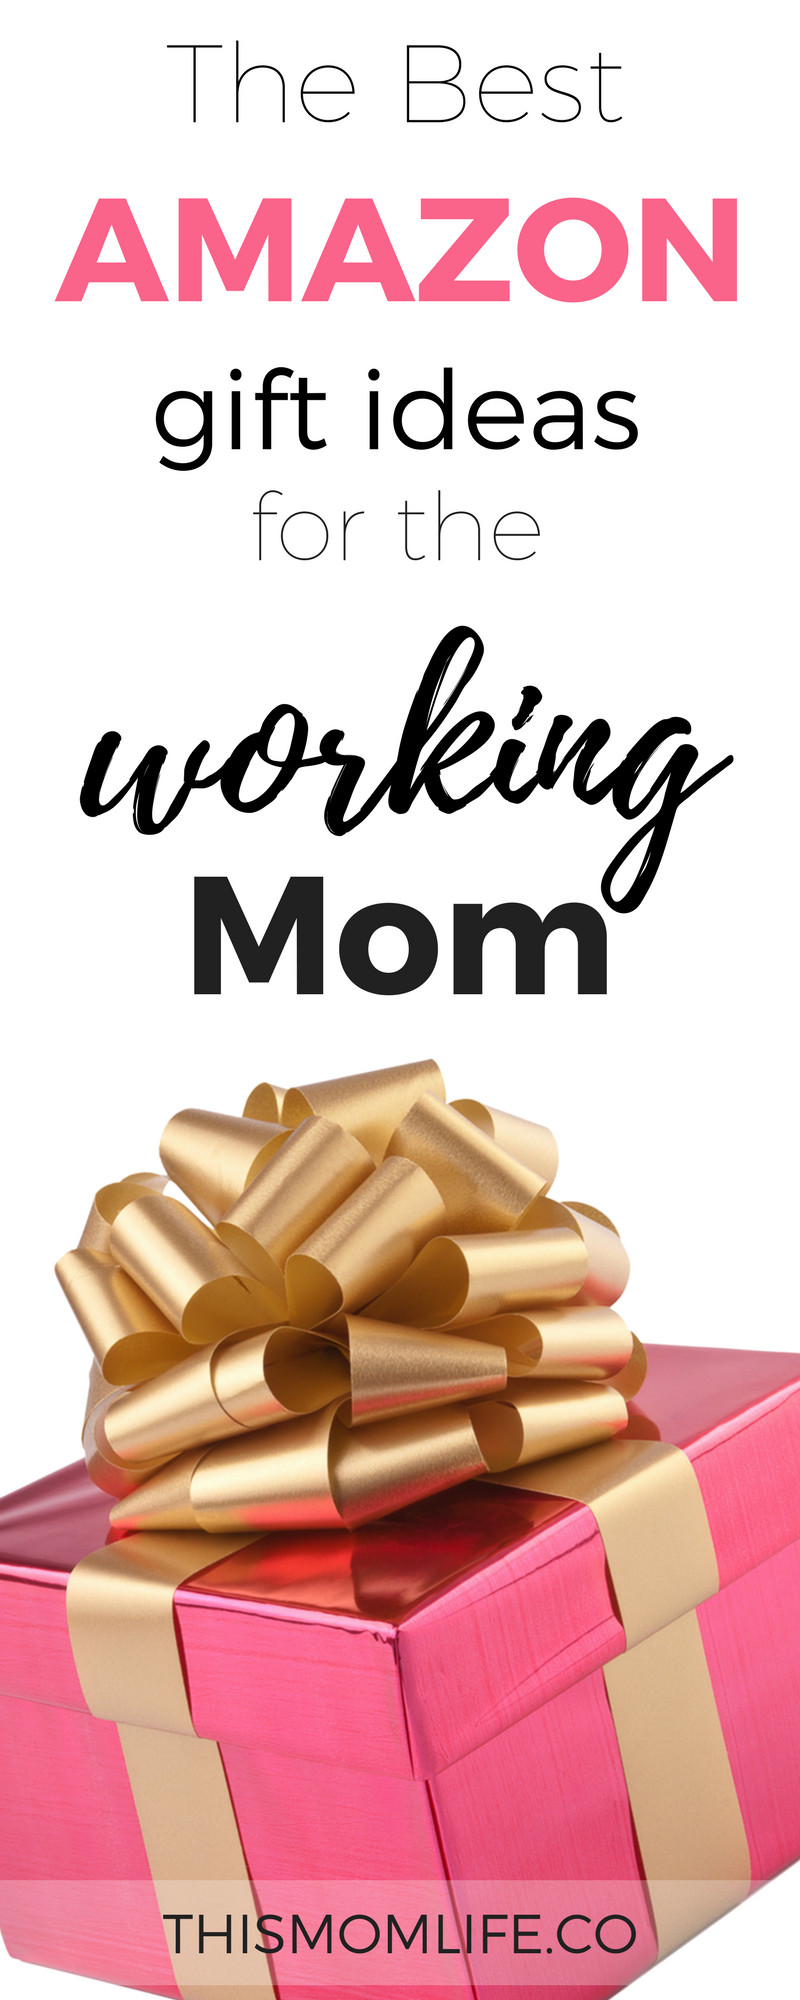 Mothers Birthday Gift Ideas
 The Best Gift Ideas for Busy Moms This Mom Life